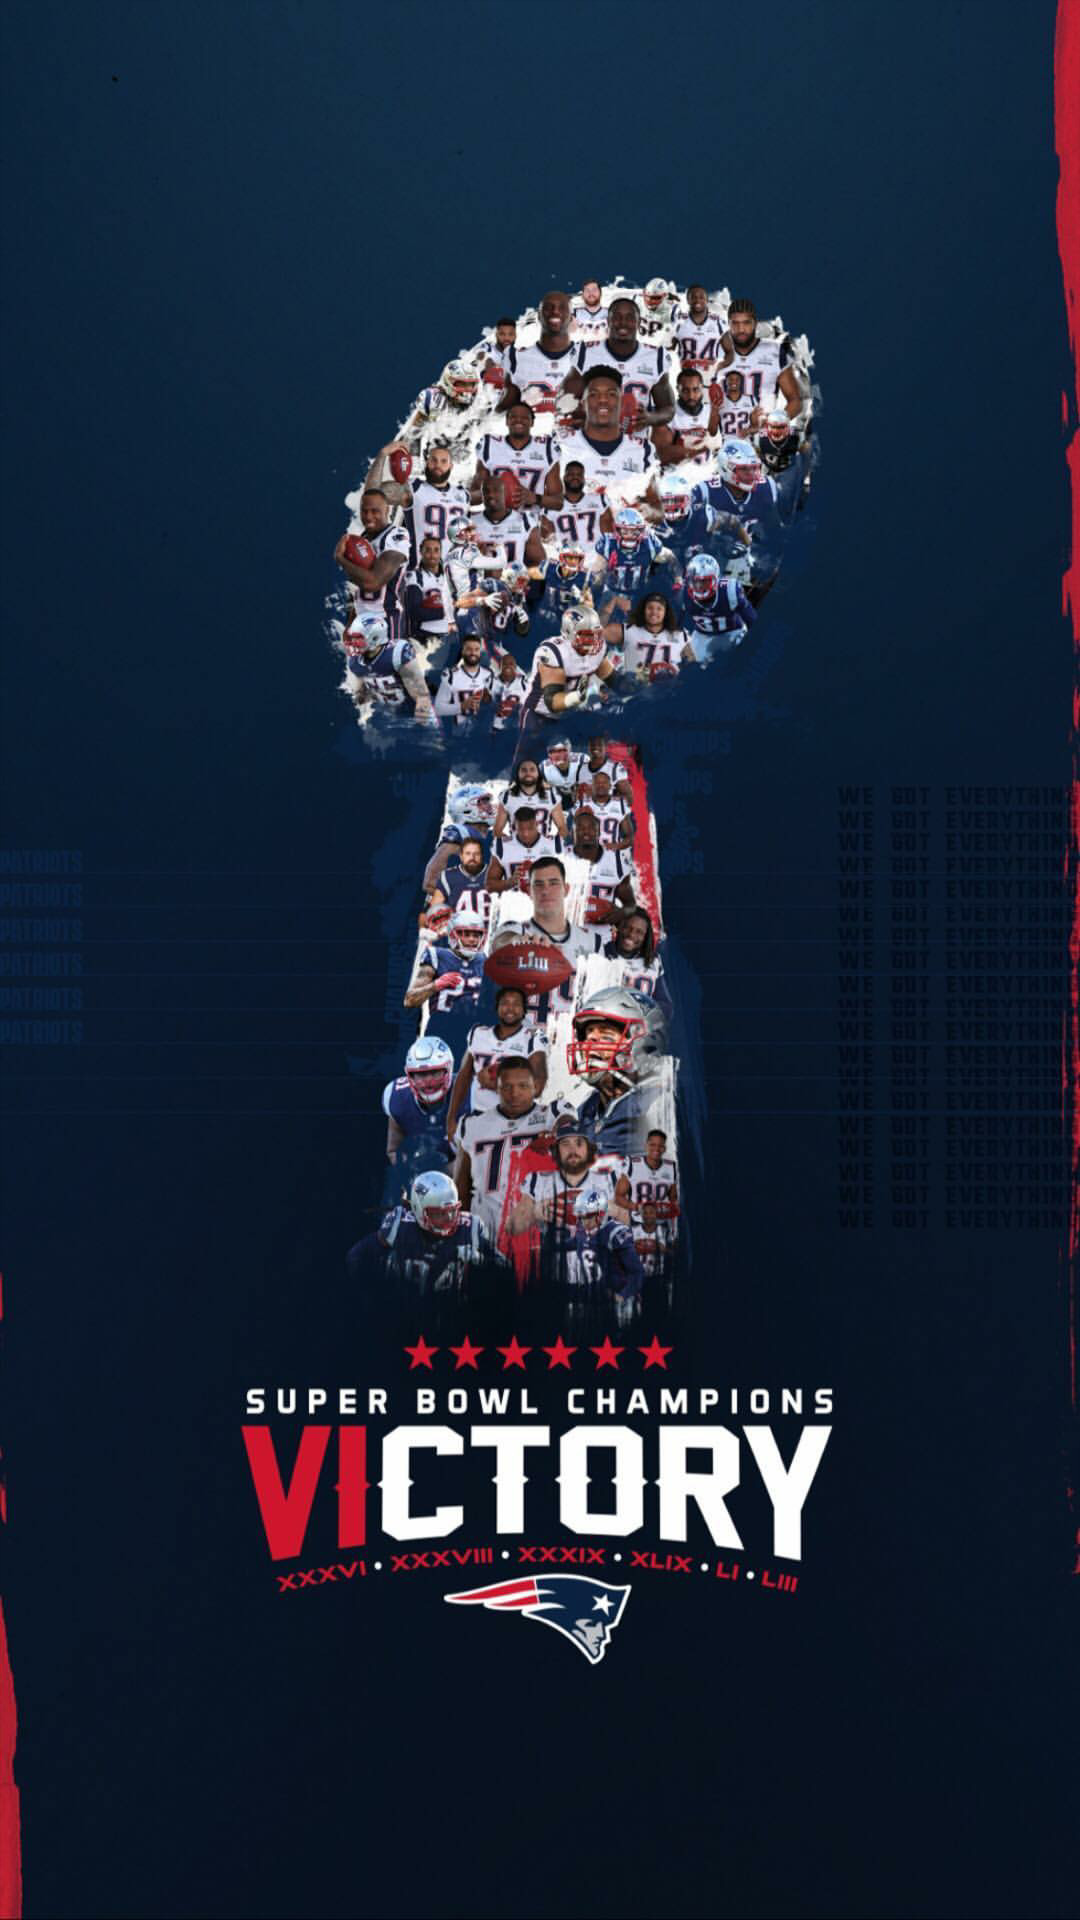 1080x1920 CasualAwesome phone wallpaper from the Pats Instagram account (i.redd.it)